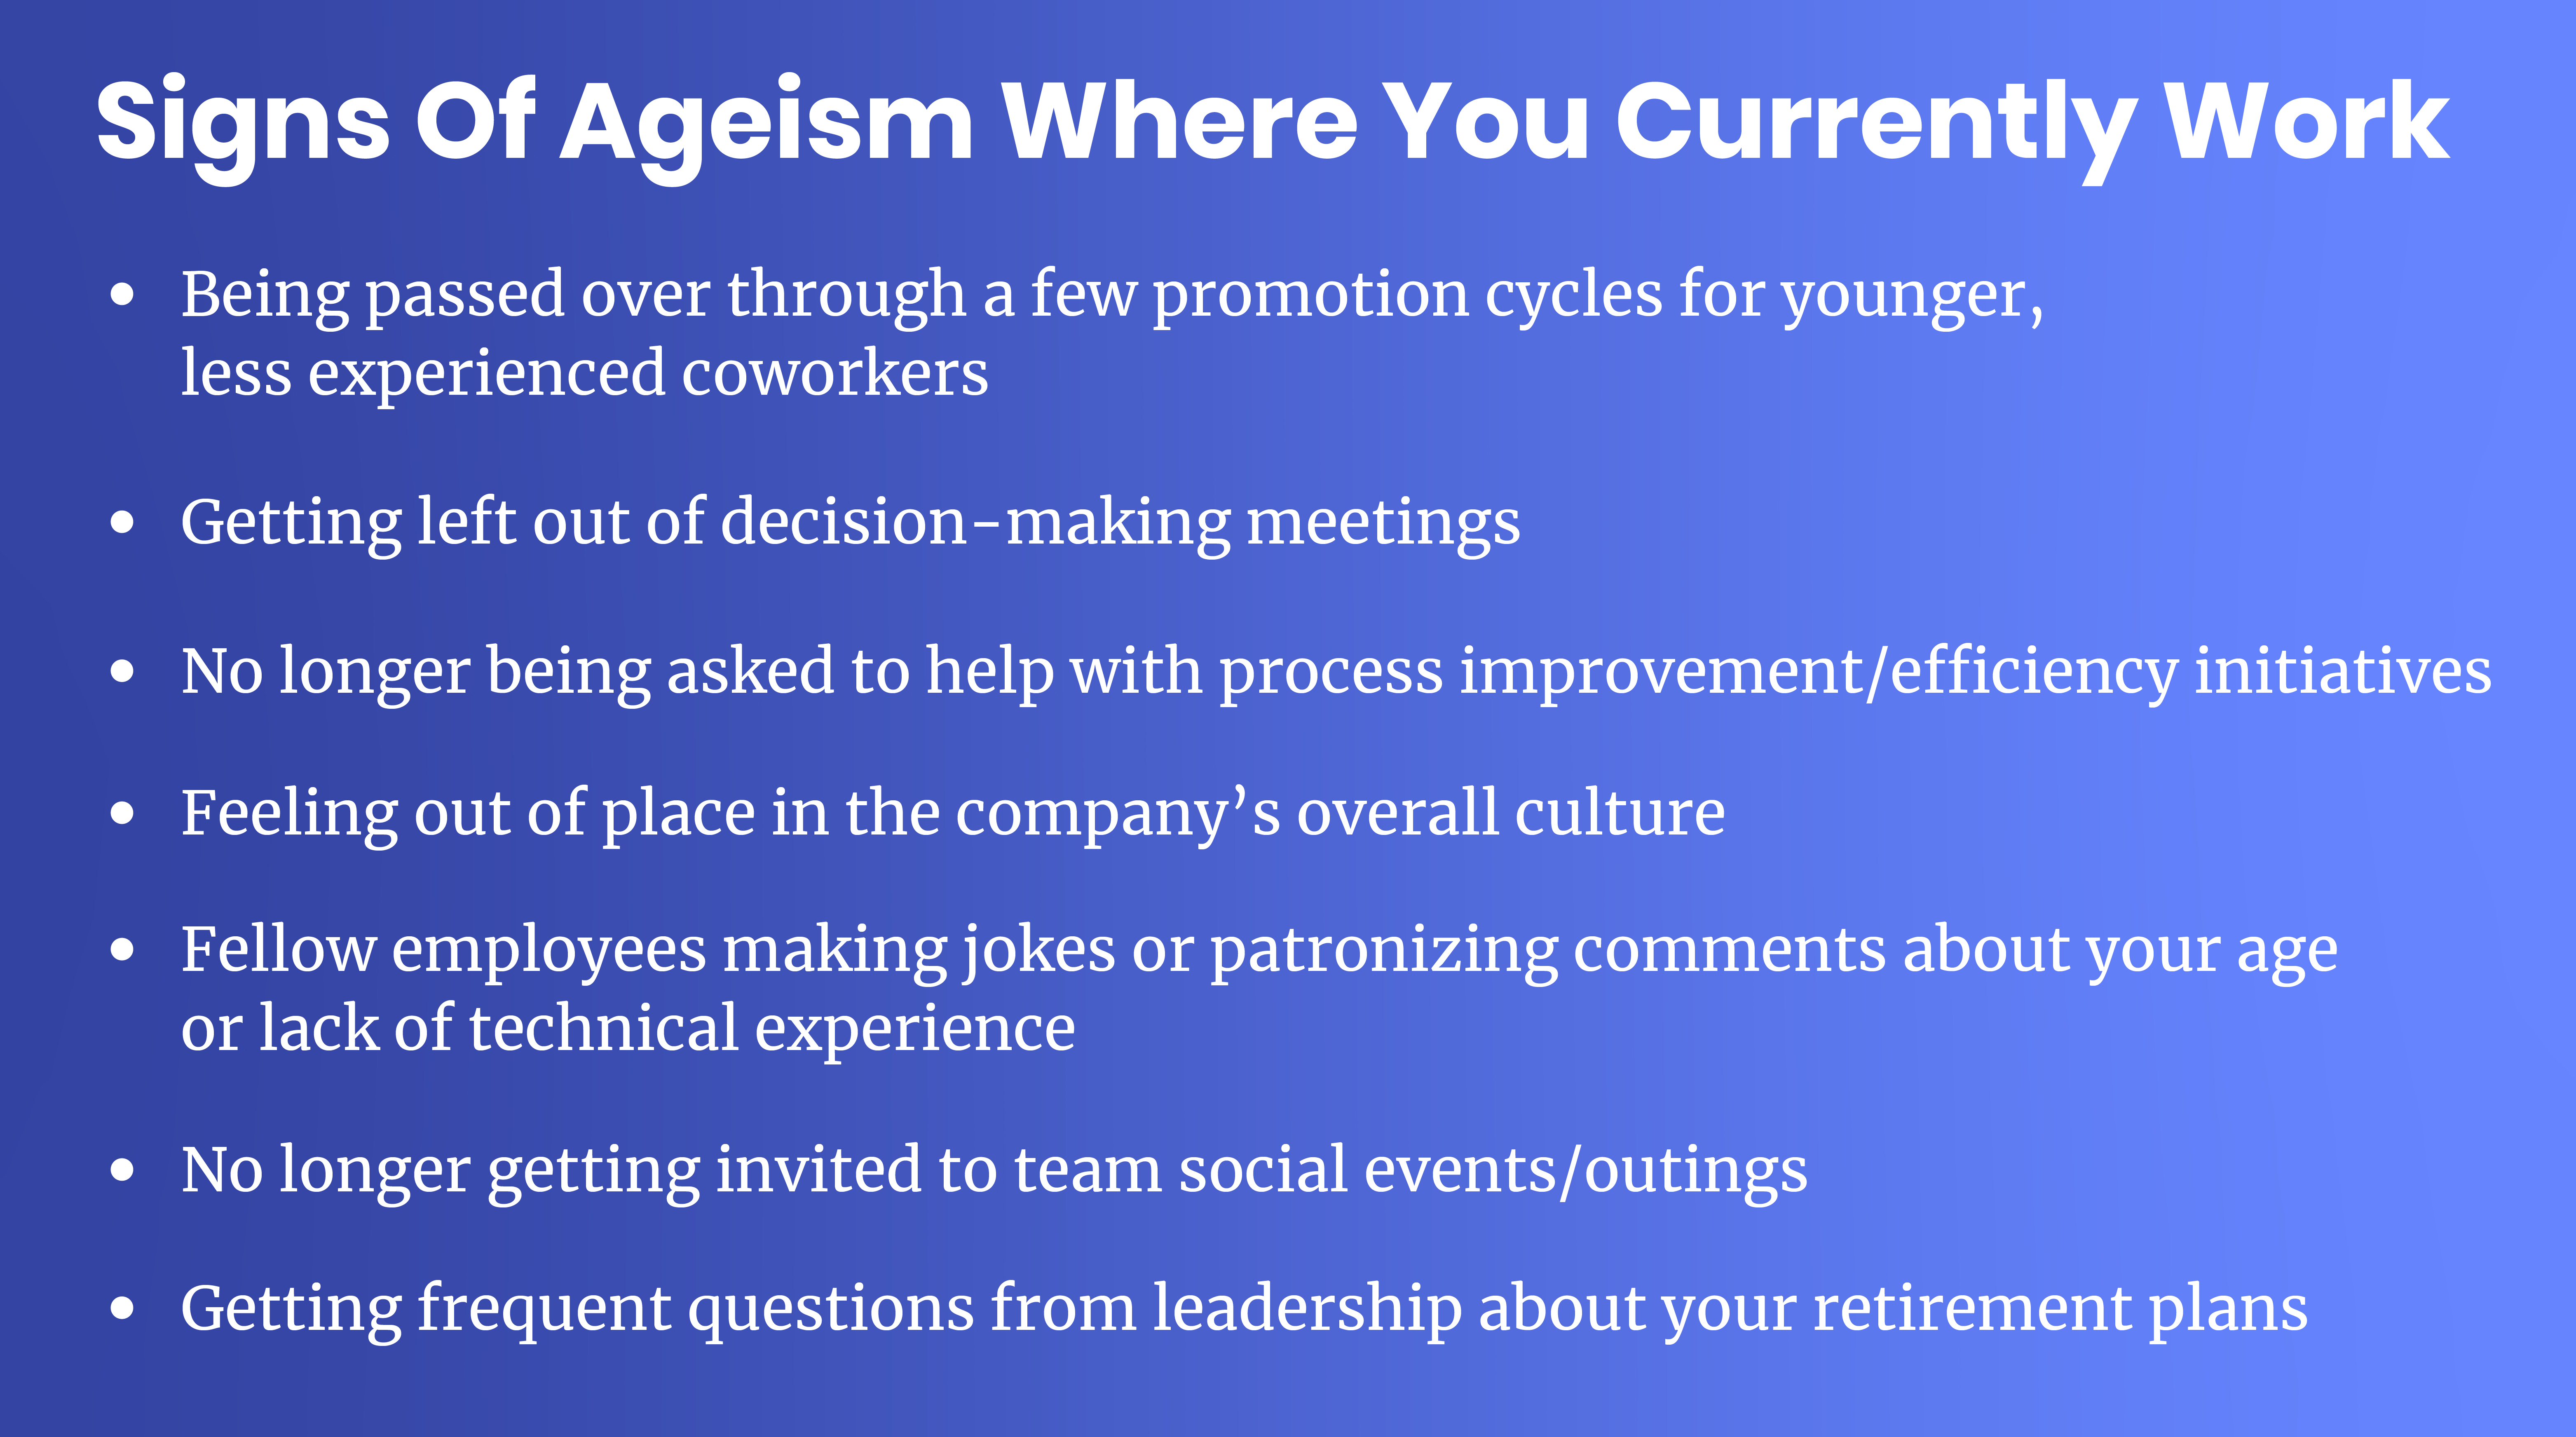 ageism signs at work